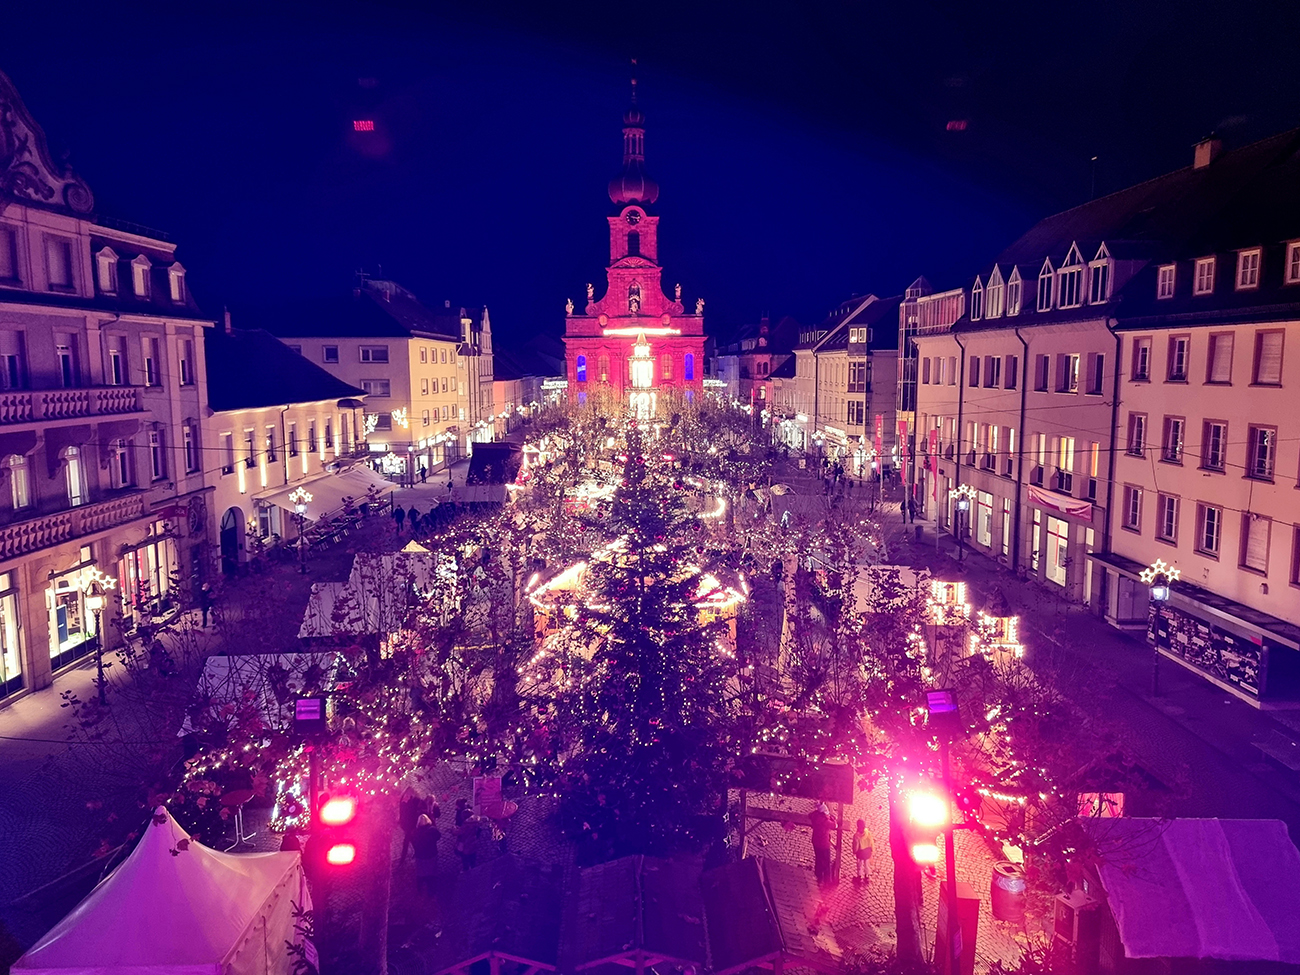 View of the Christmas market from the town hall balcony